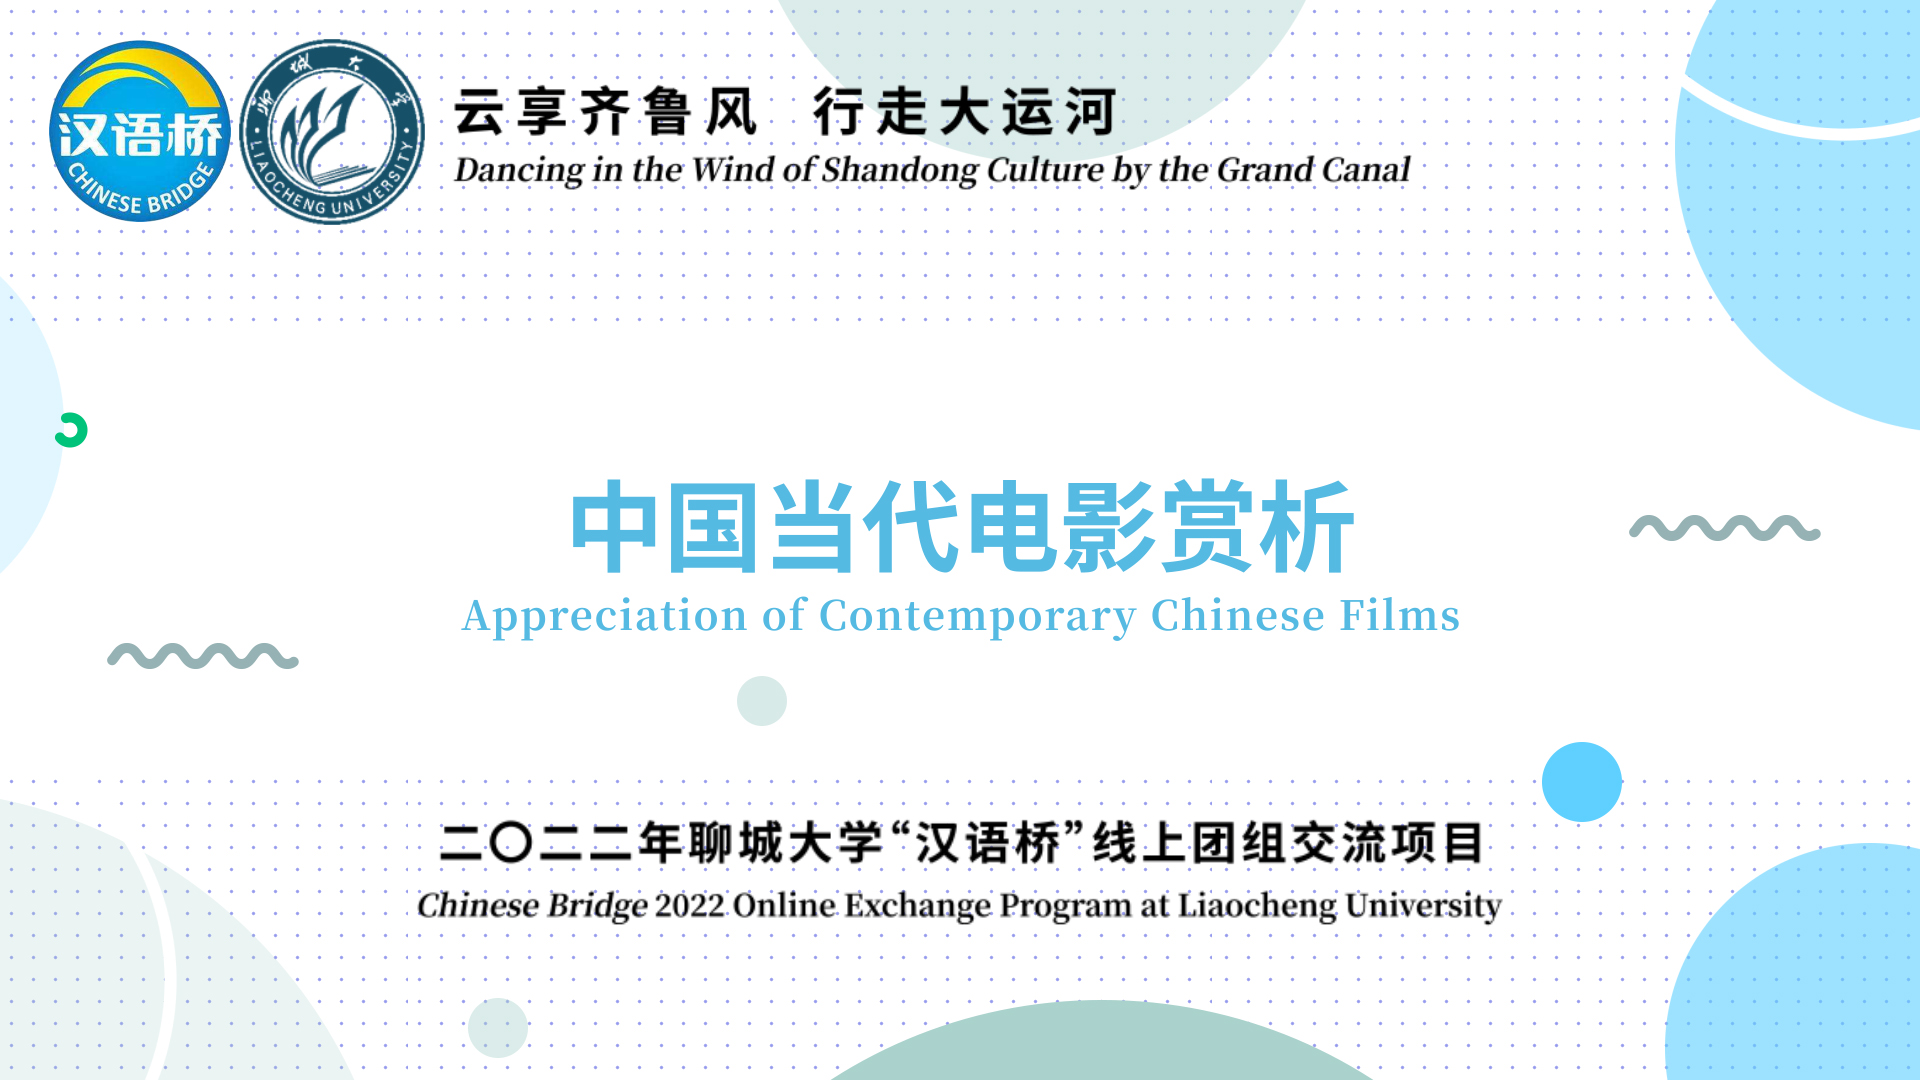 Appreciation of Contemporary Chinese Films